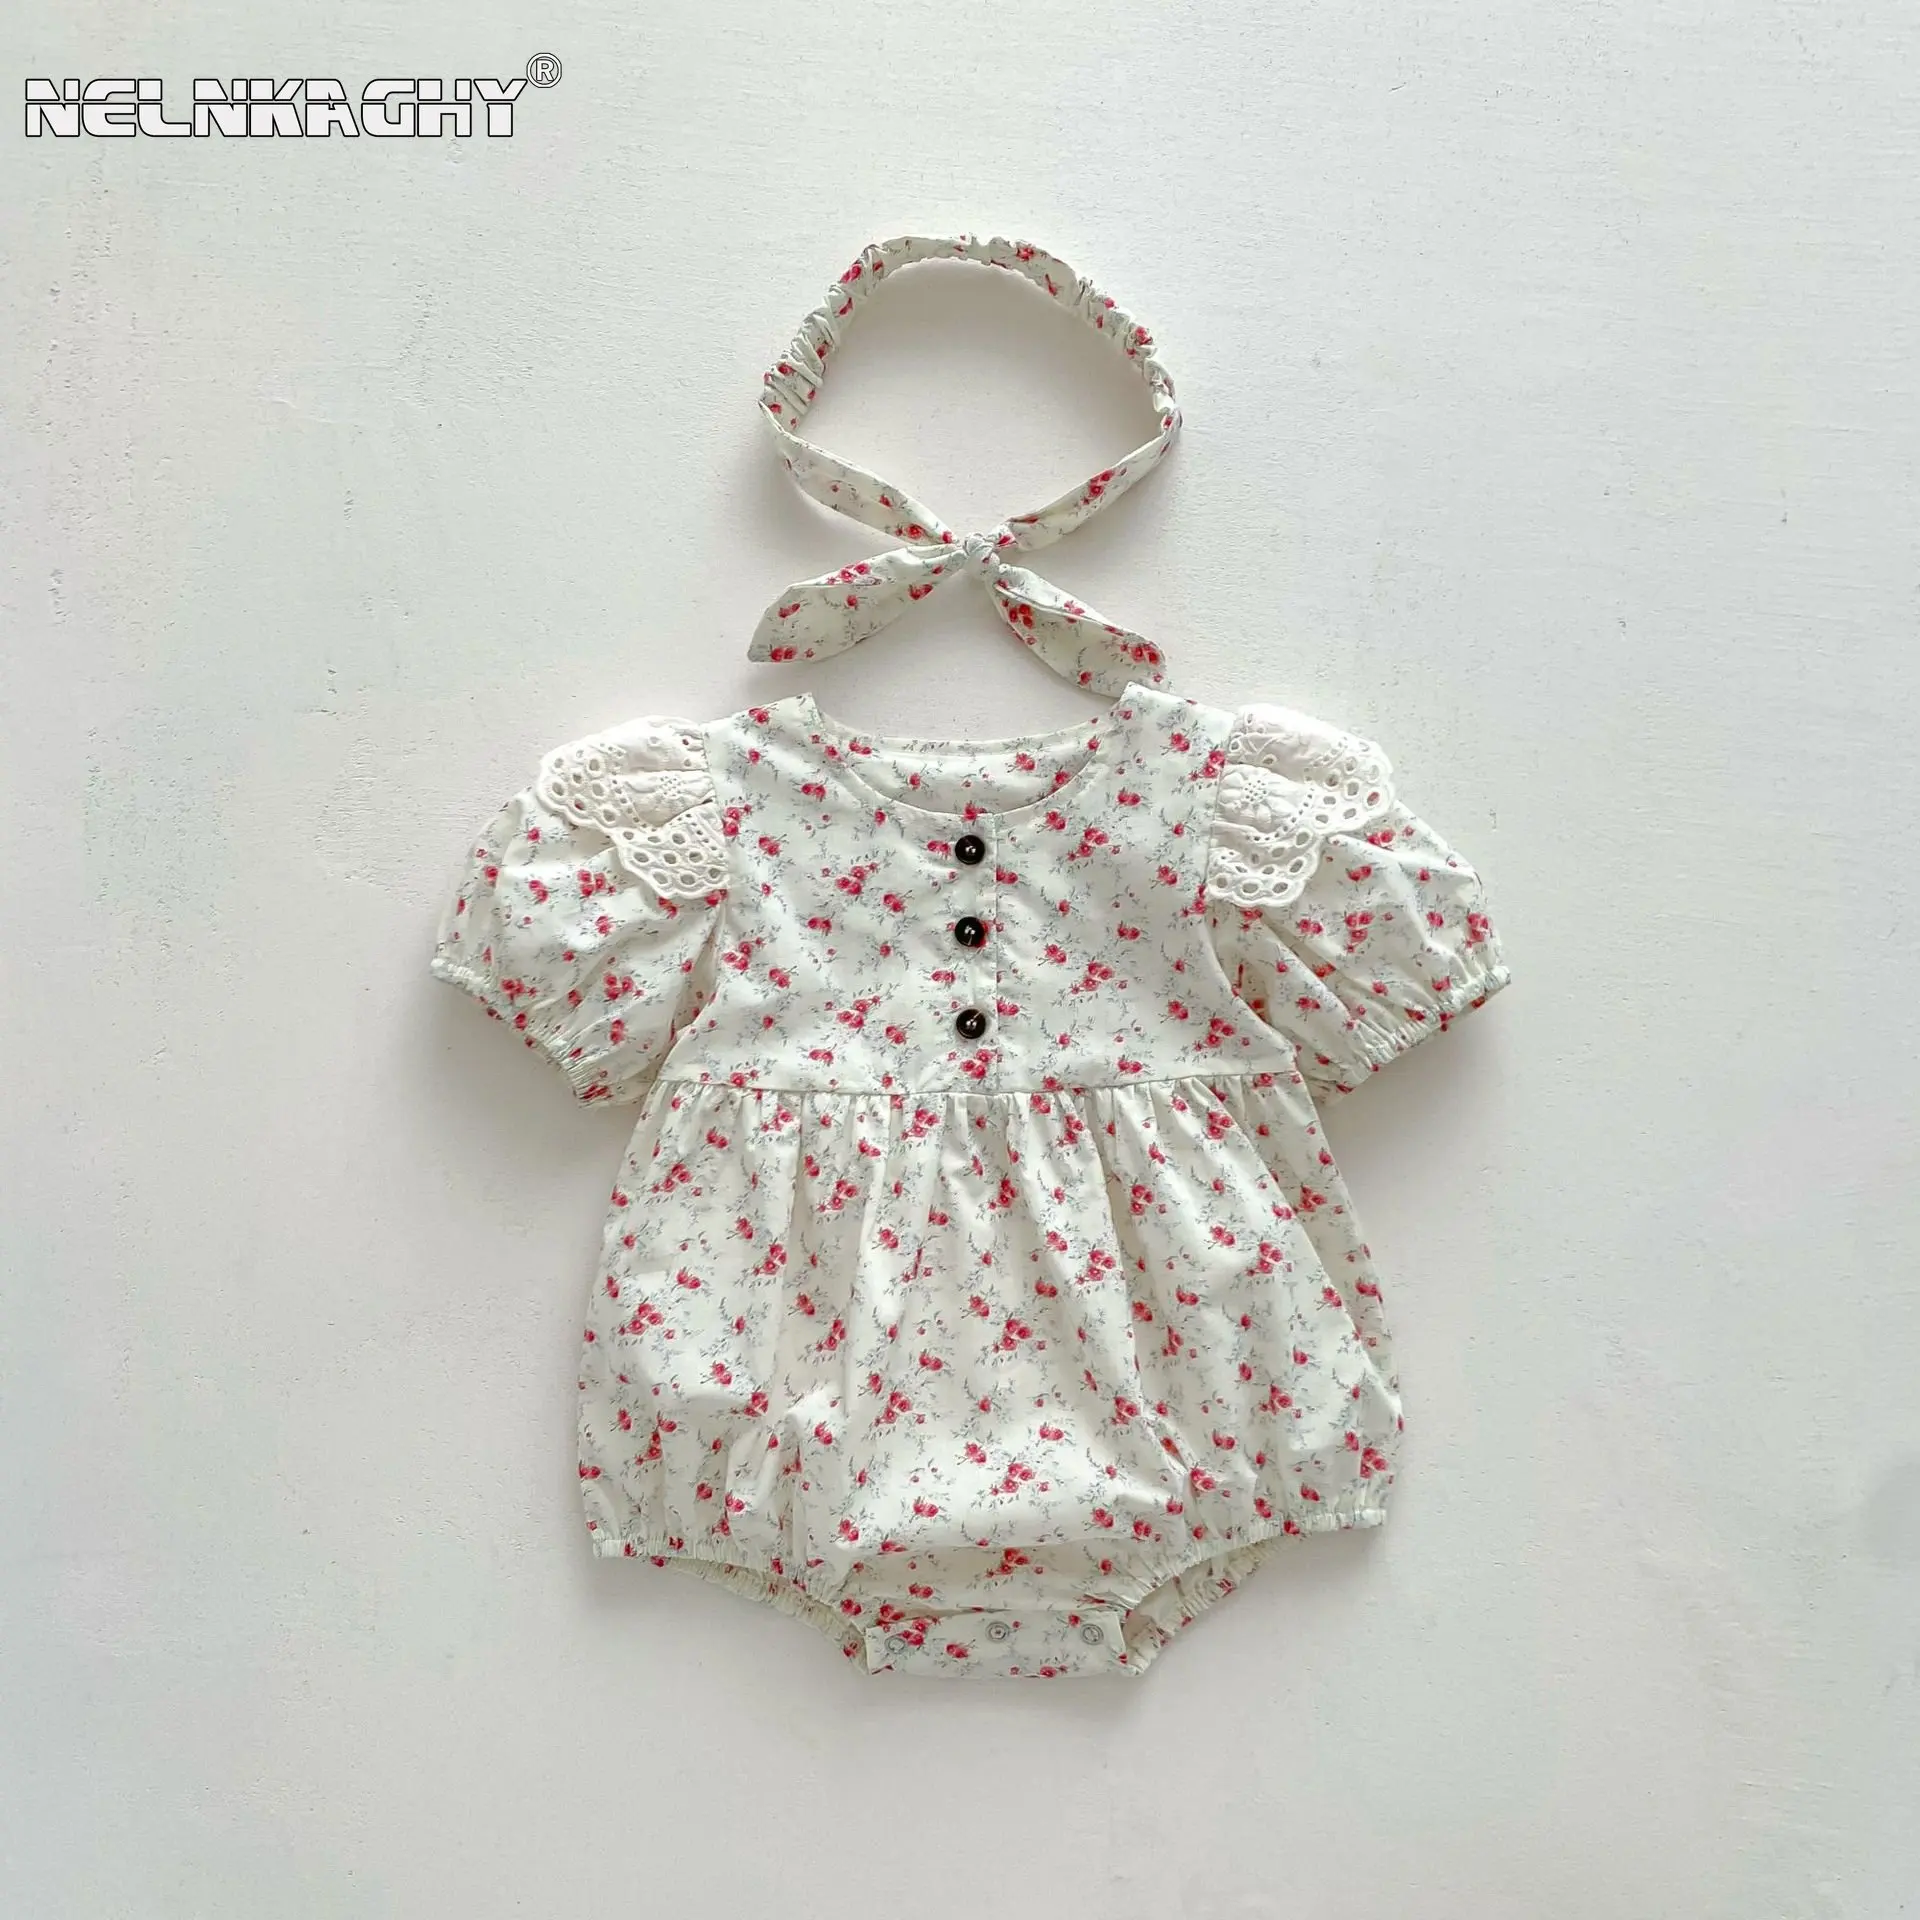 newborn baby girls short sleeve floral patchwork lace outwear infant kids cotton clothing toddler bodysuit gift headbands 유아복